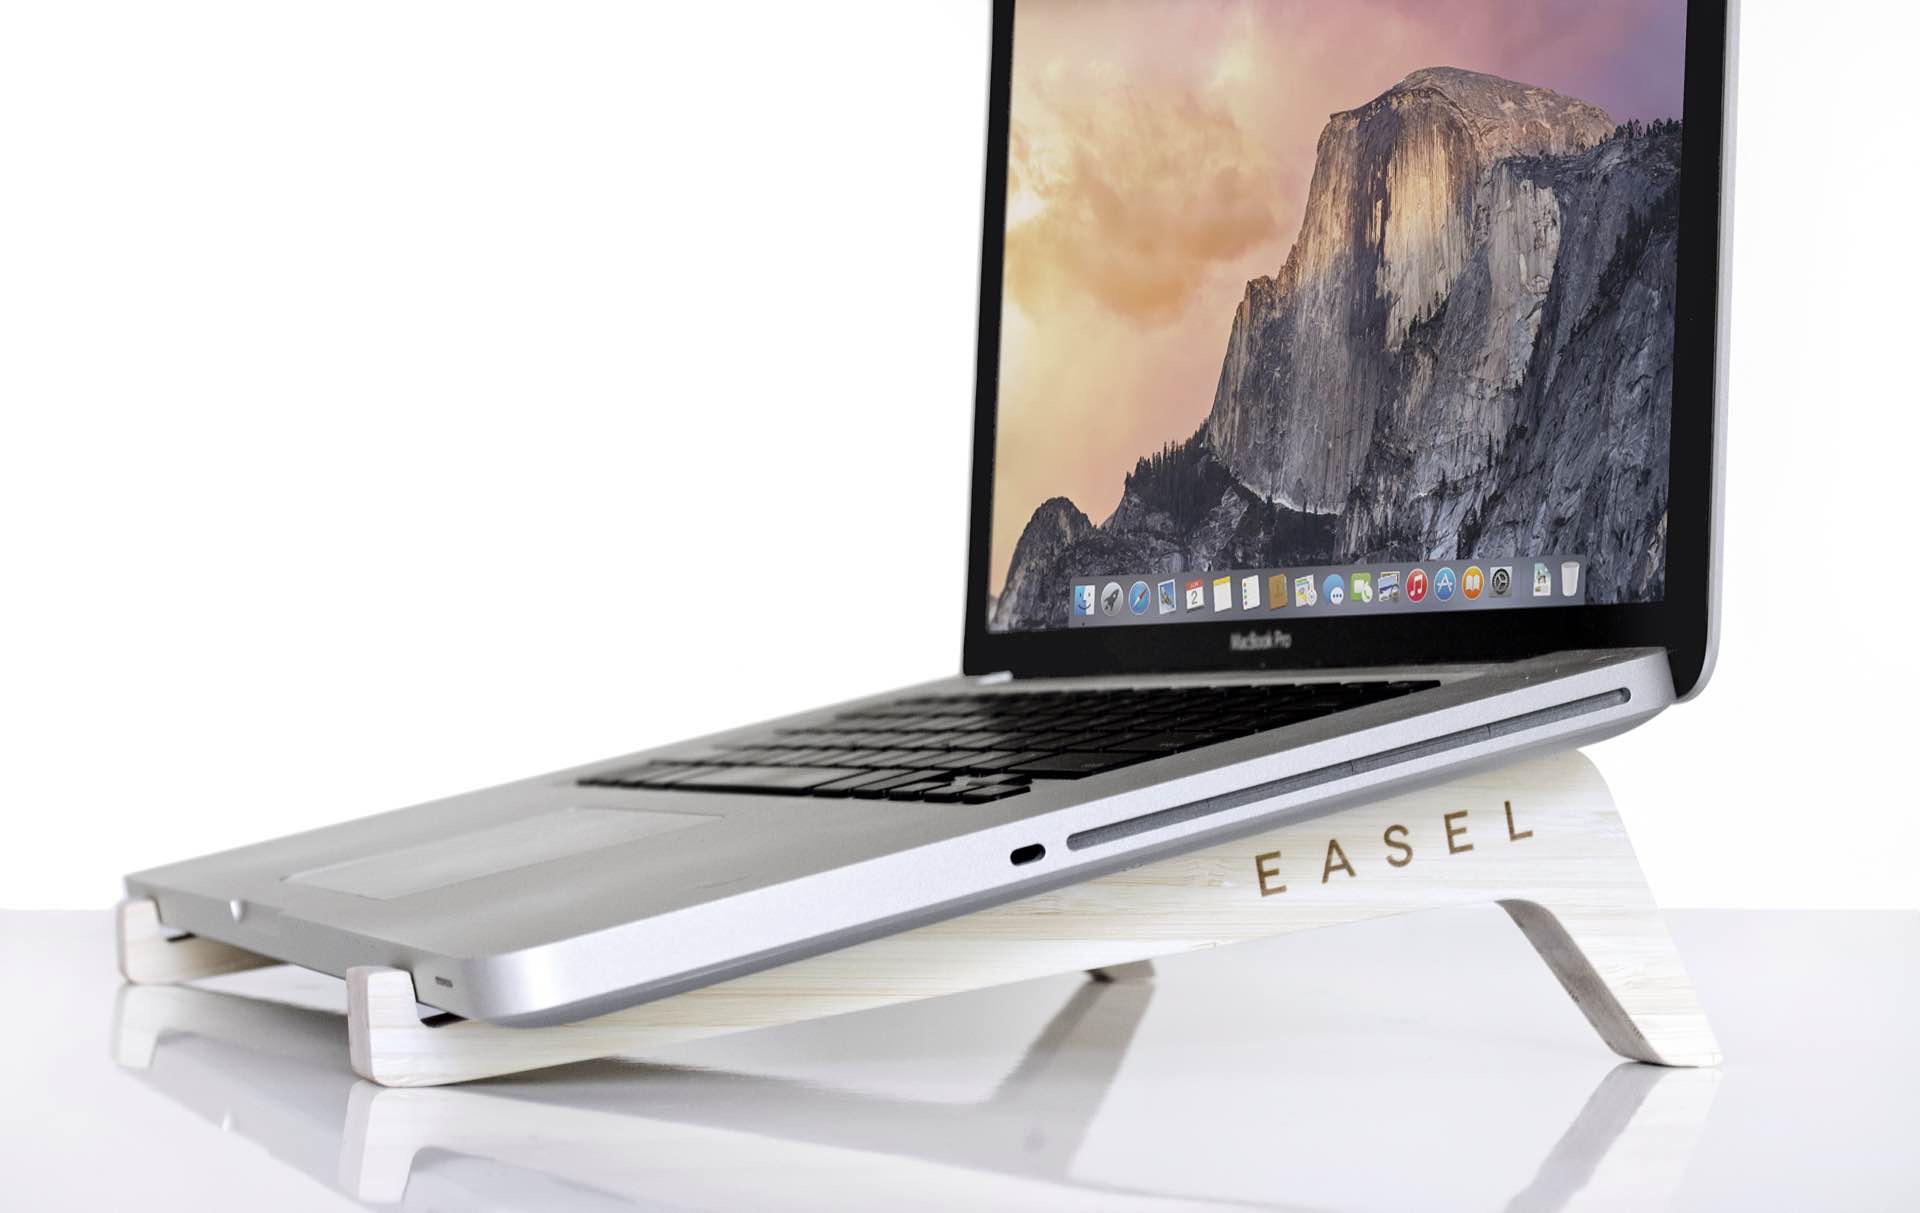 iskelter-easel-laptop-stand